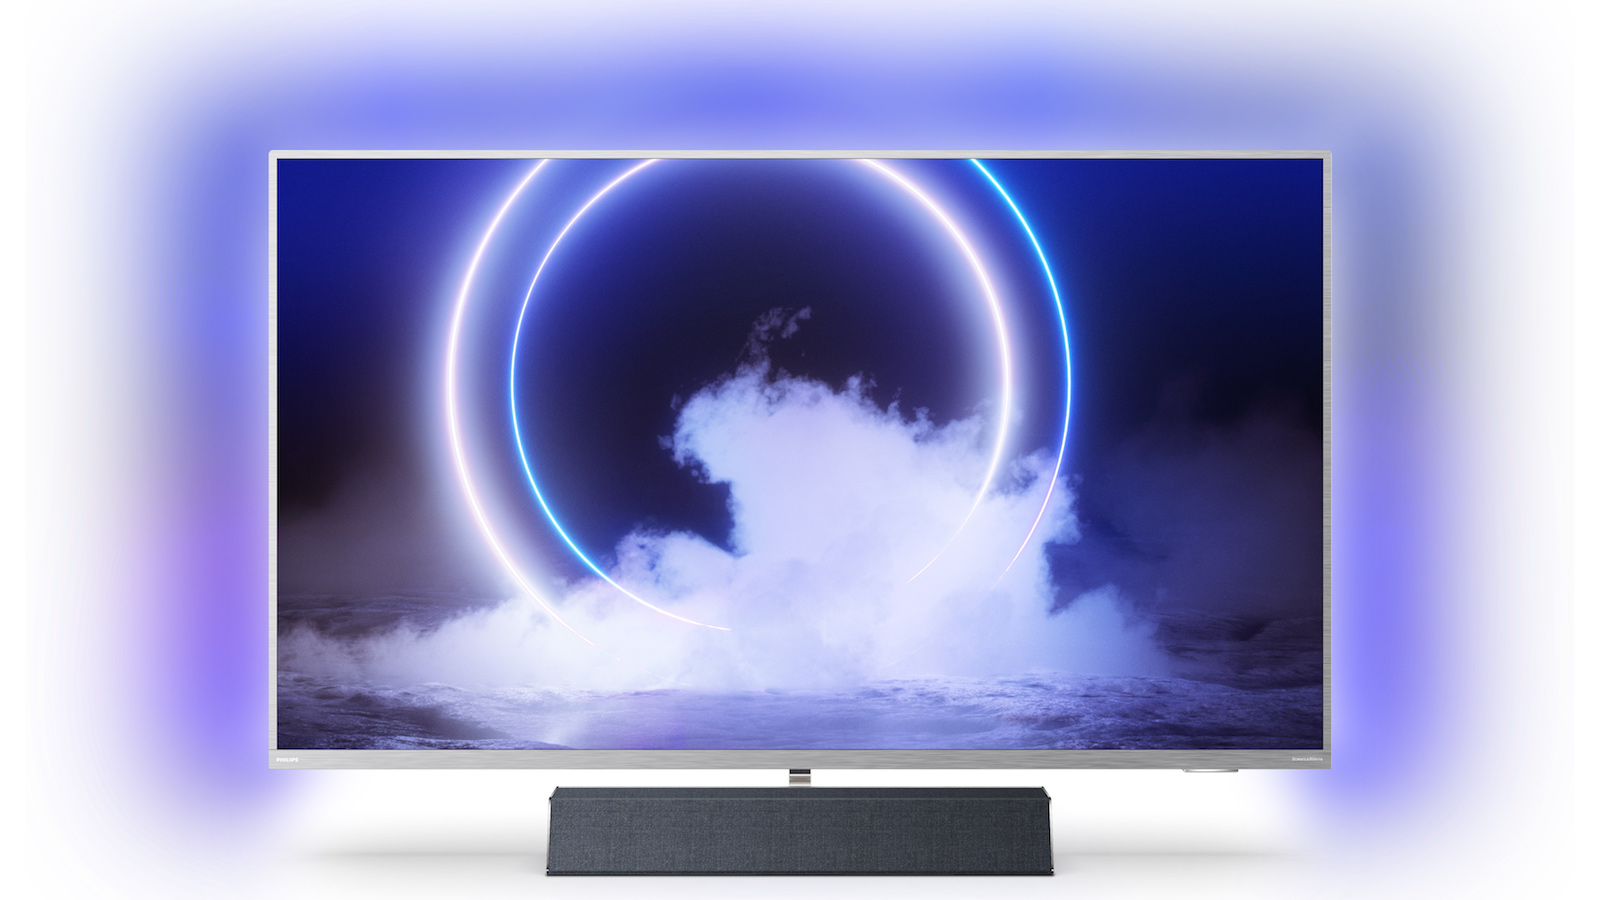 Philips 2020 TVs: 4K, Full HD, OLED, LCD - everything you need to know